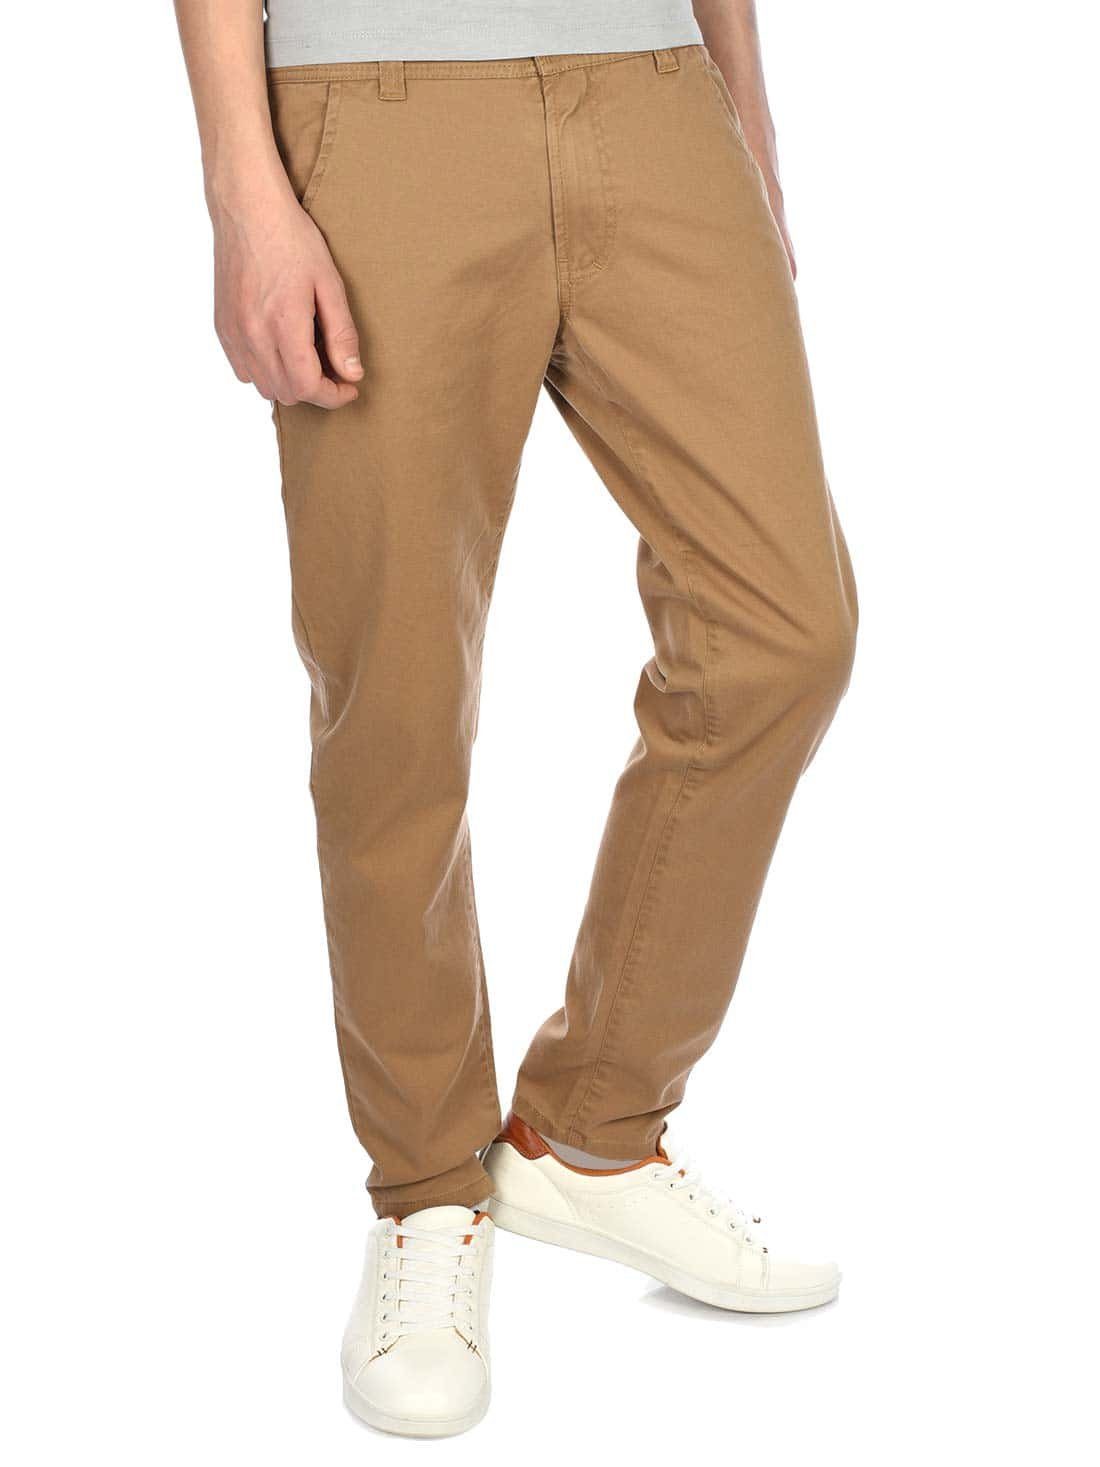 (1-tlg) Beige Chinohose Jungen BEZLIT Hose Chino casual